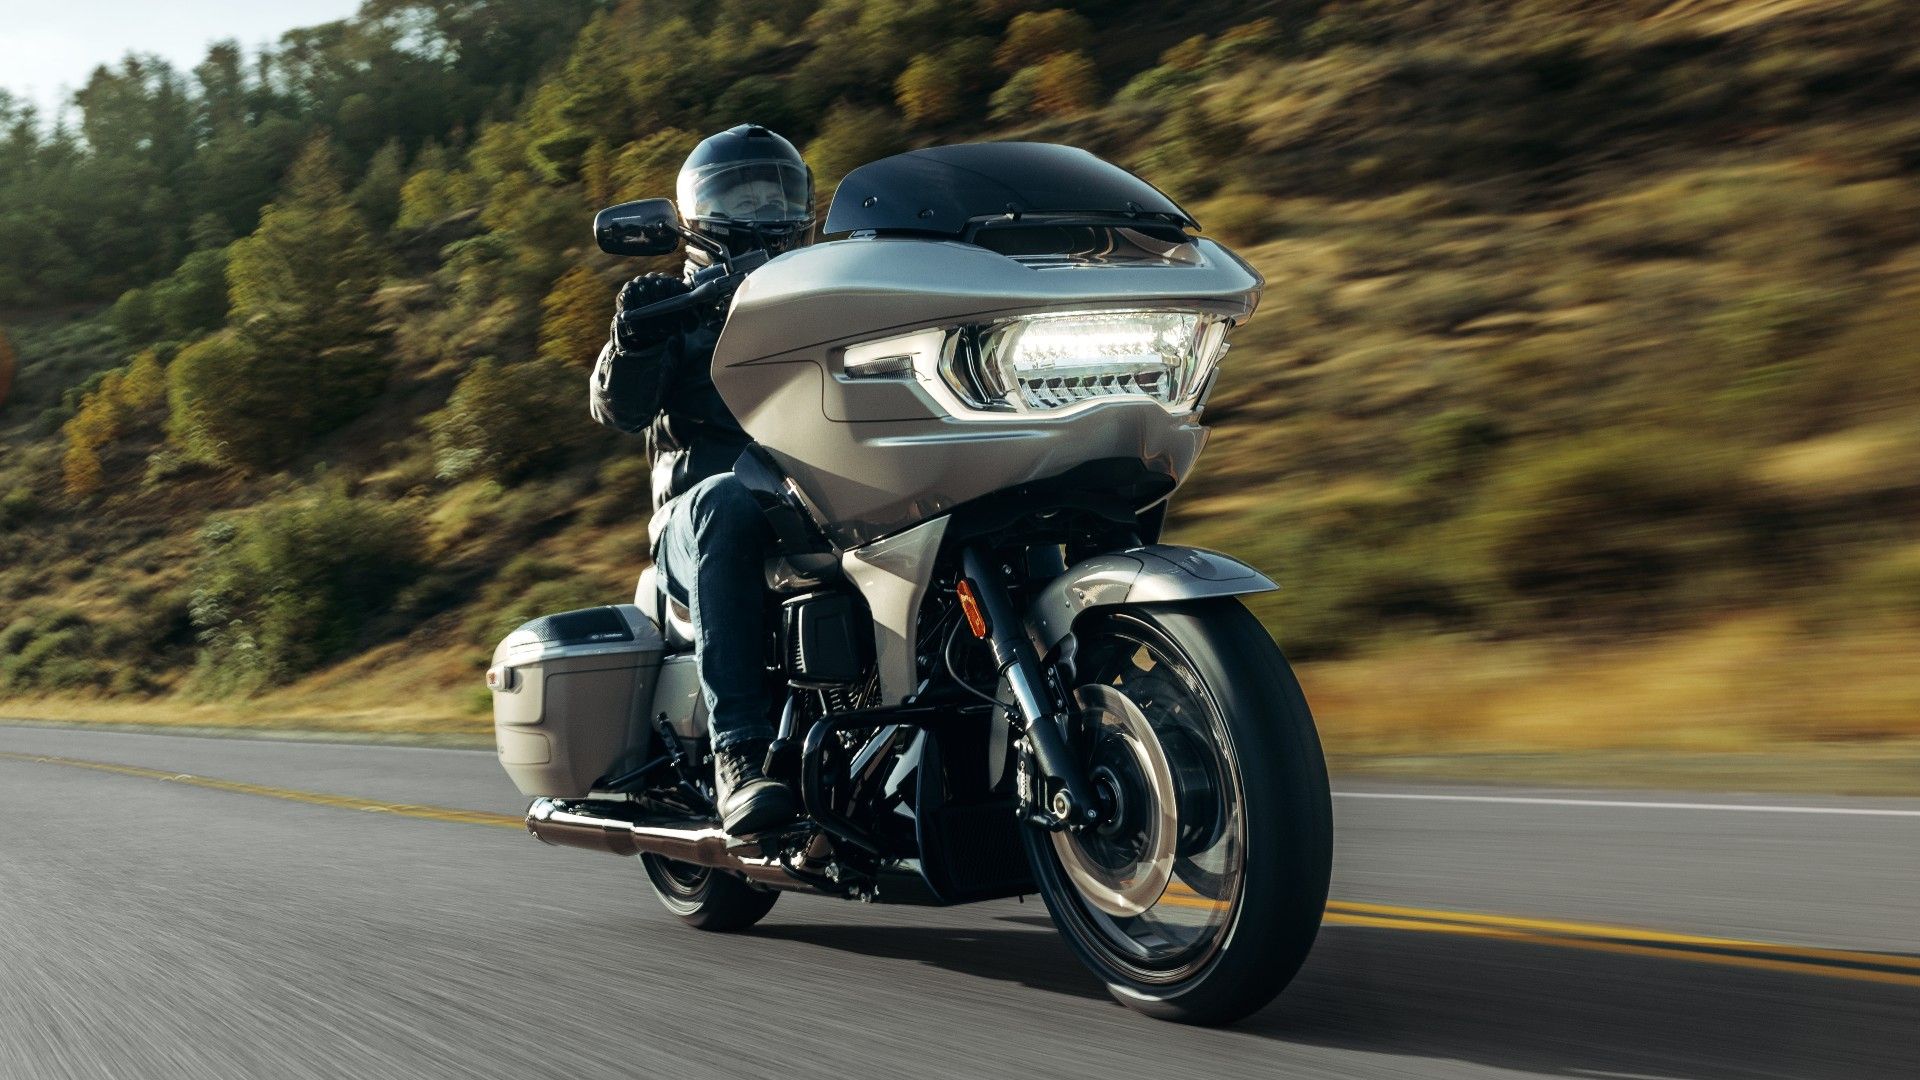 How Different Is The New Harley-Davidson CVO Road Glide From Its Old Self?